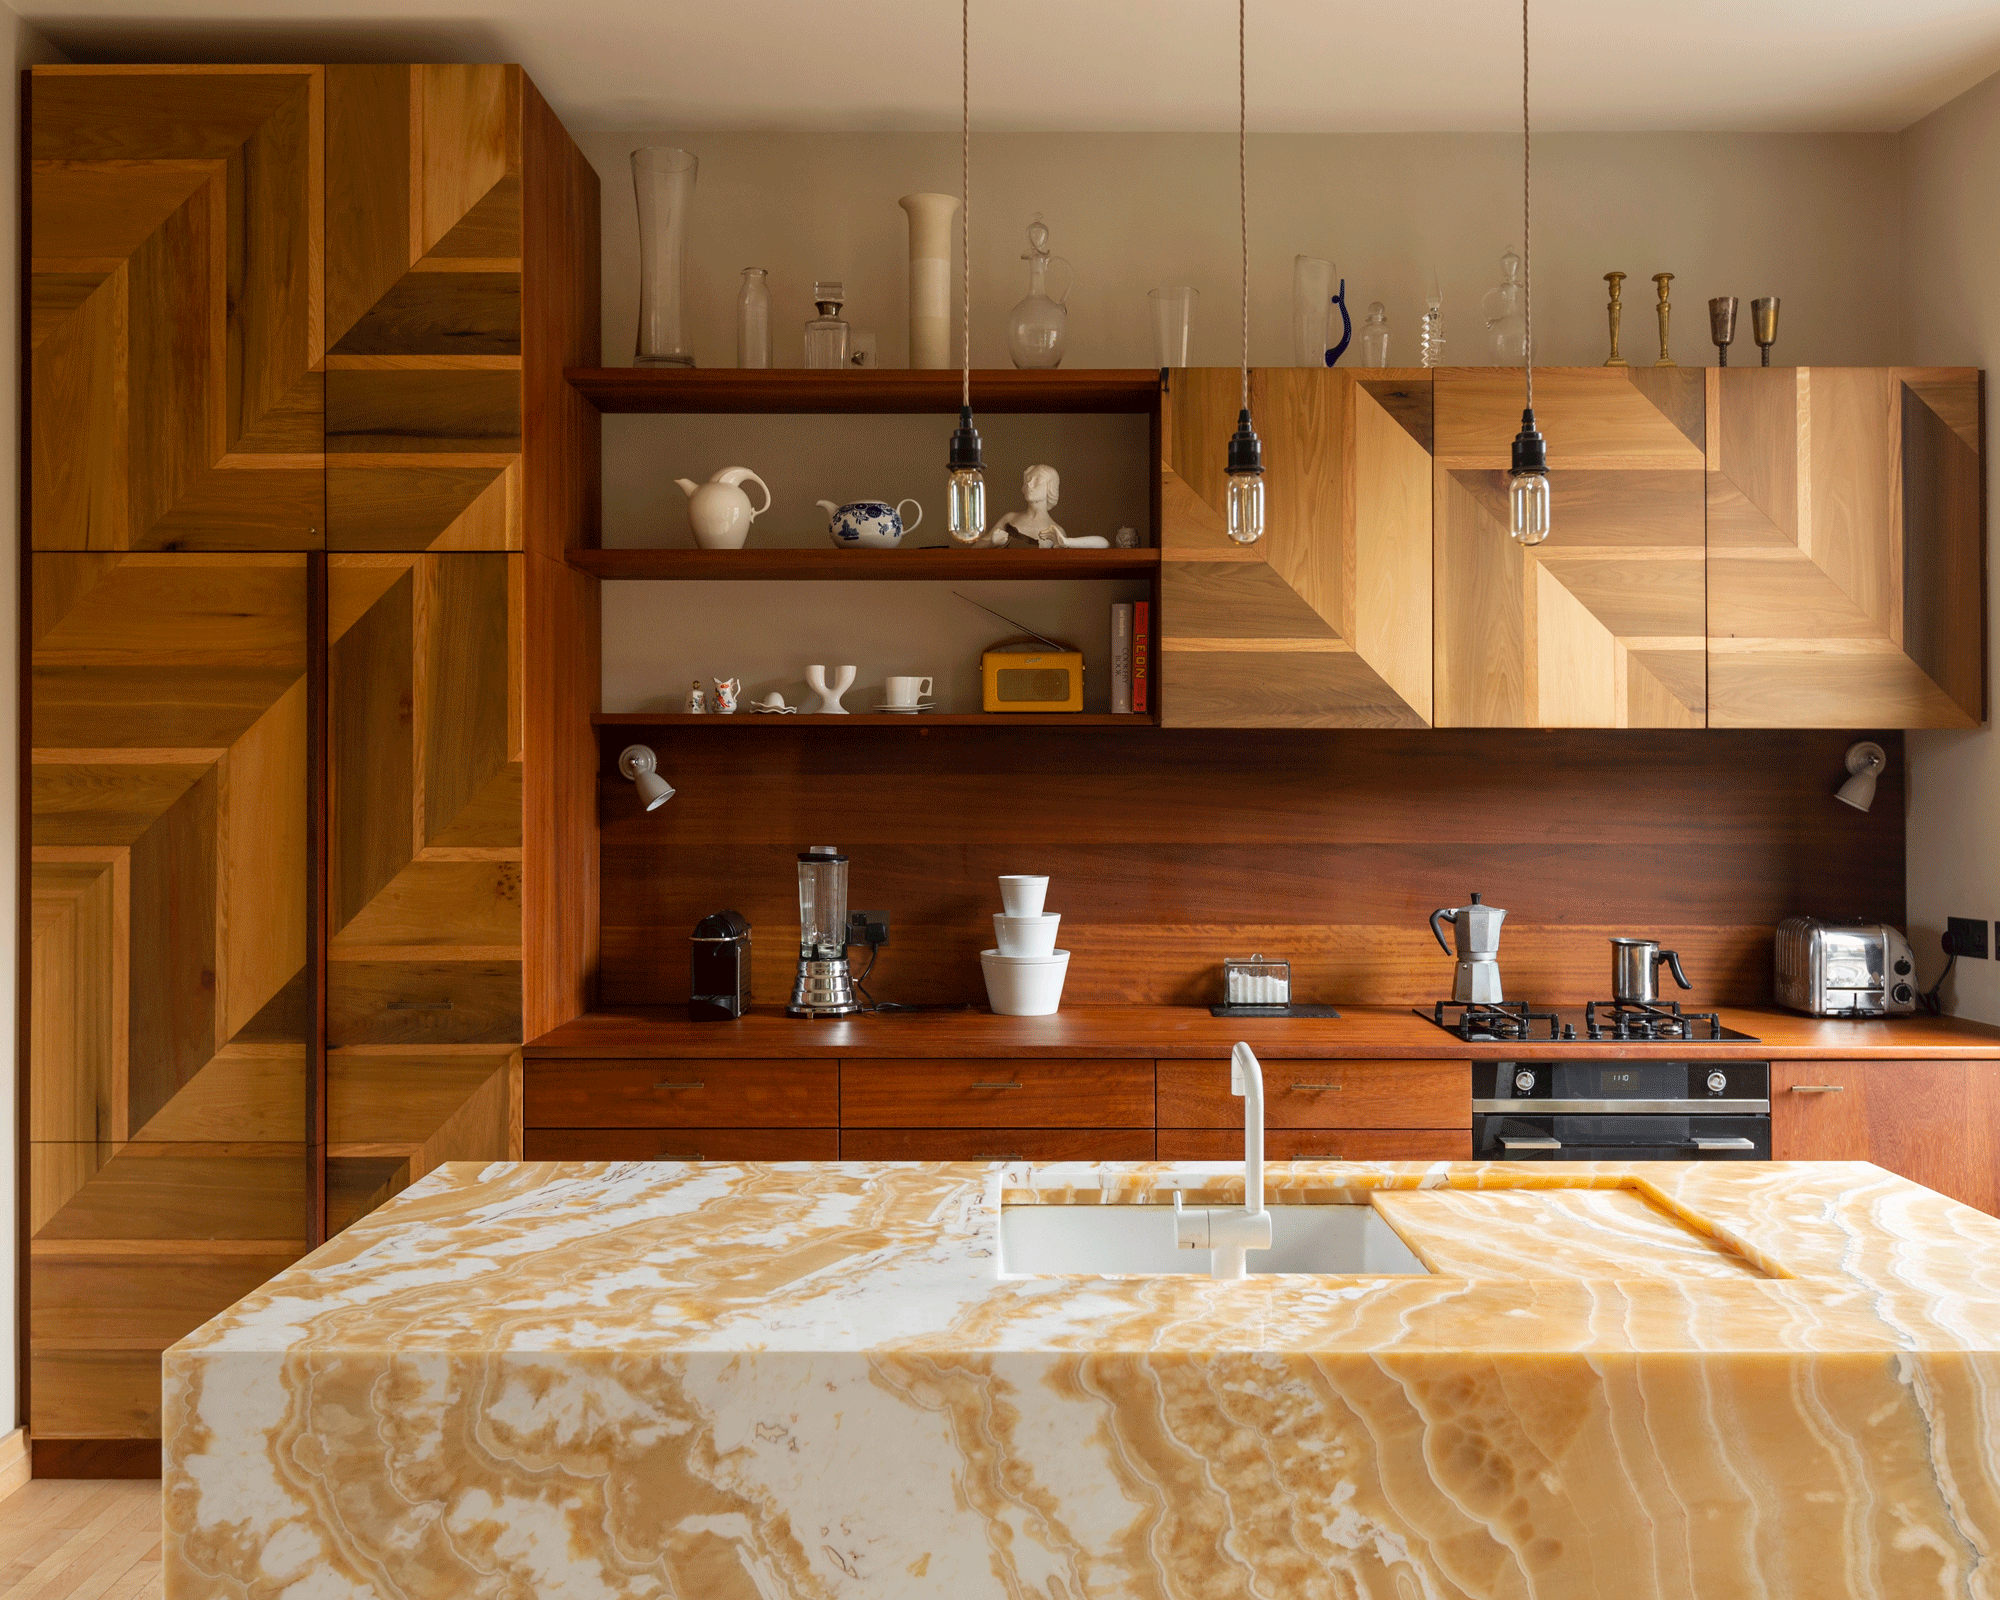 Detail-Oriented Cabinetry